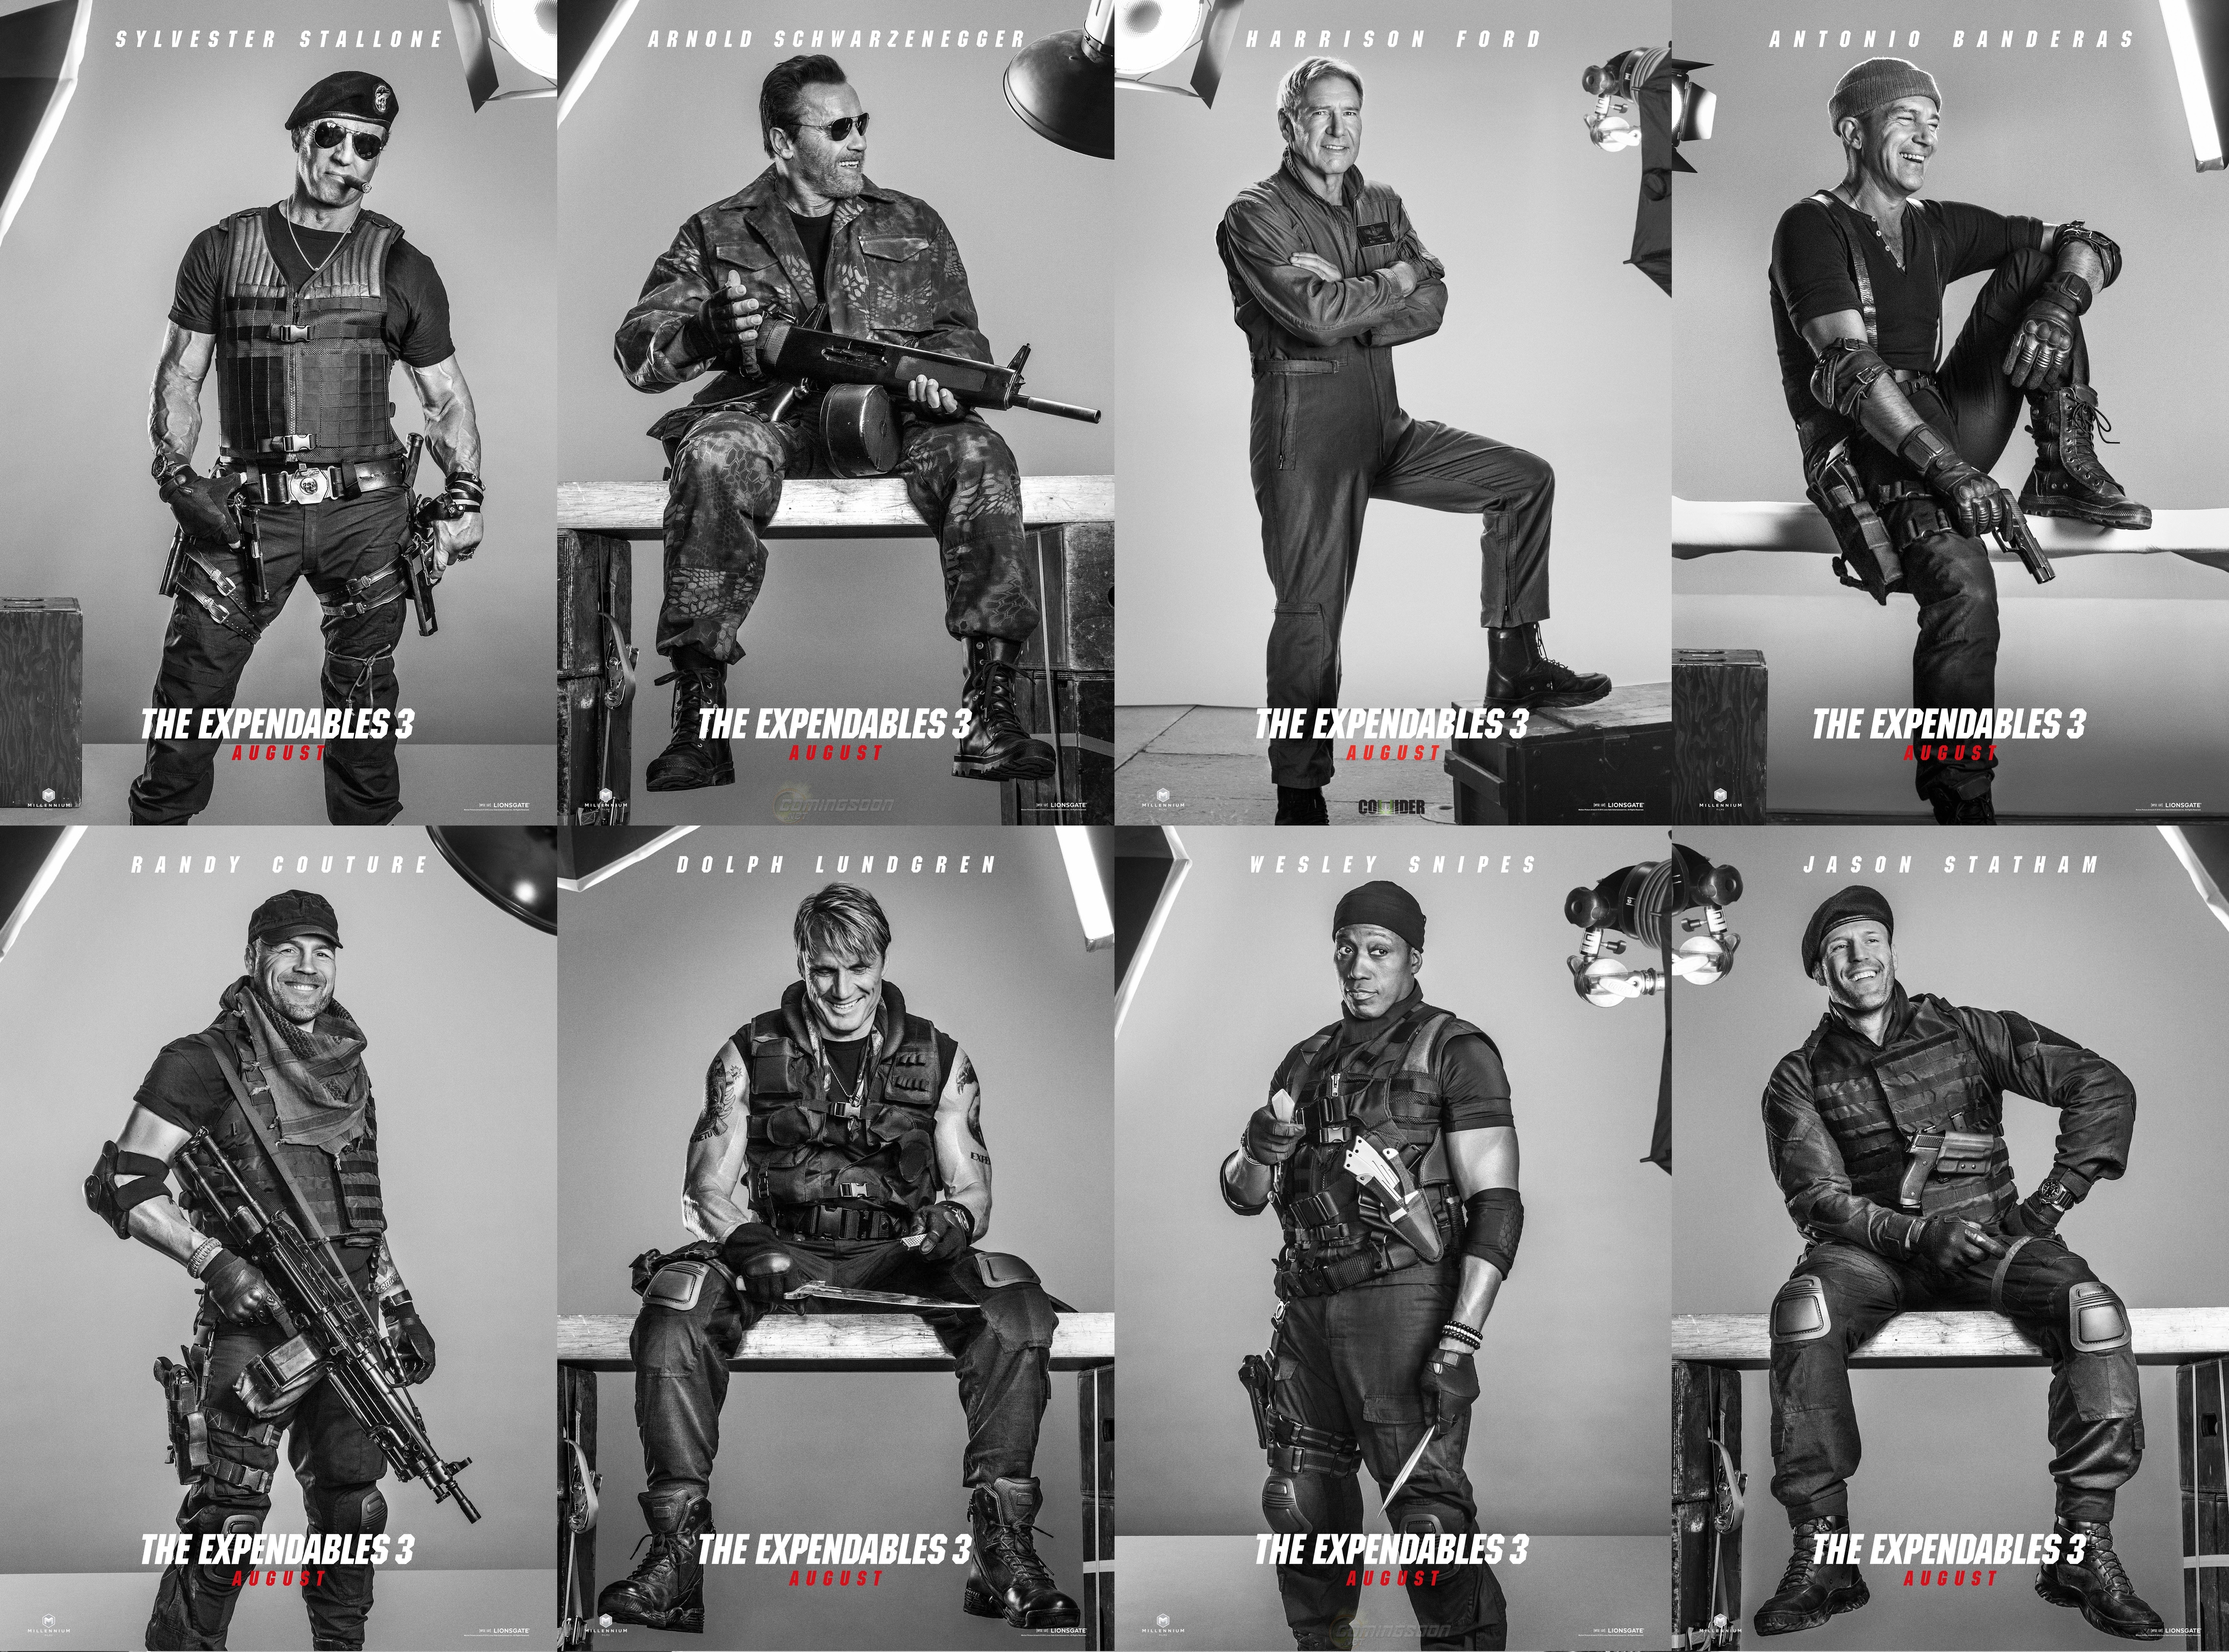 harrison ford, wesley snipes, movie, the expendables 3, antonio banderas, arnold schwarzenegger, barney ross, doc (the expendables), dolph lundgren, galgo (the expendables), gunnar jensen, jason statham, lee christmas, max drummer, randy couture, sylvester stallone, toll road, trench (the expendables), the expendables